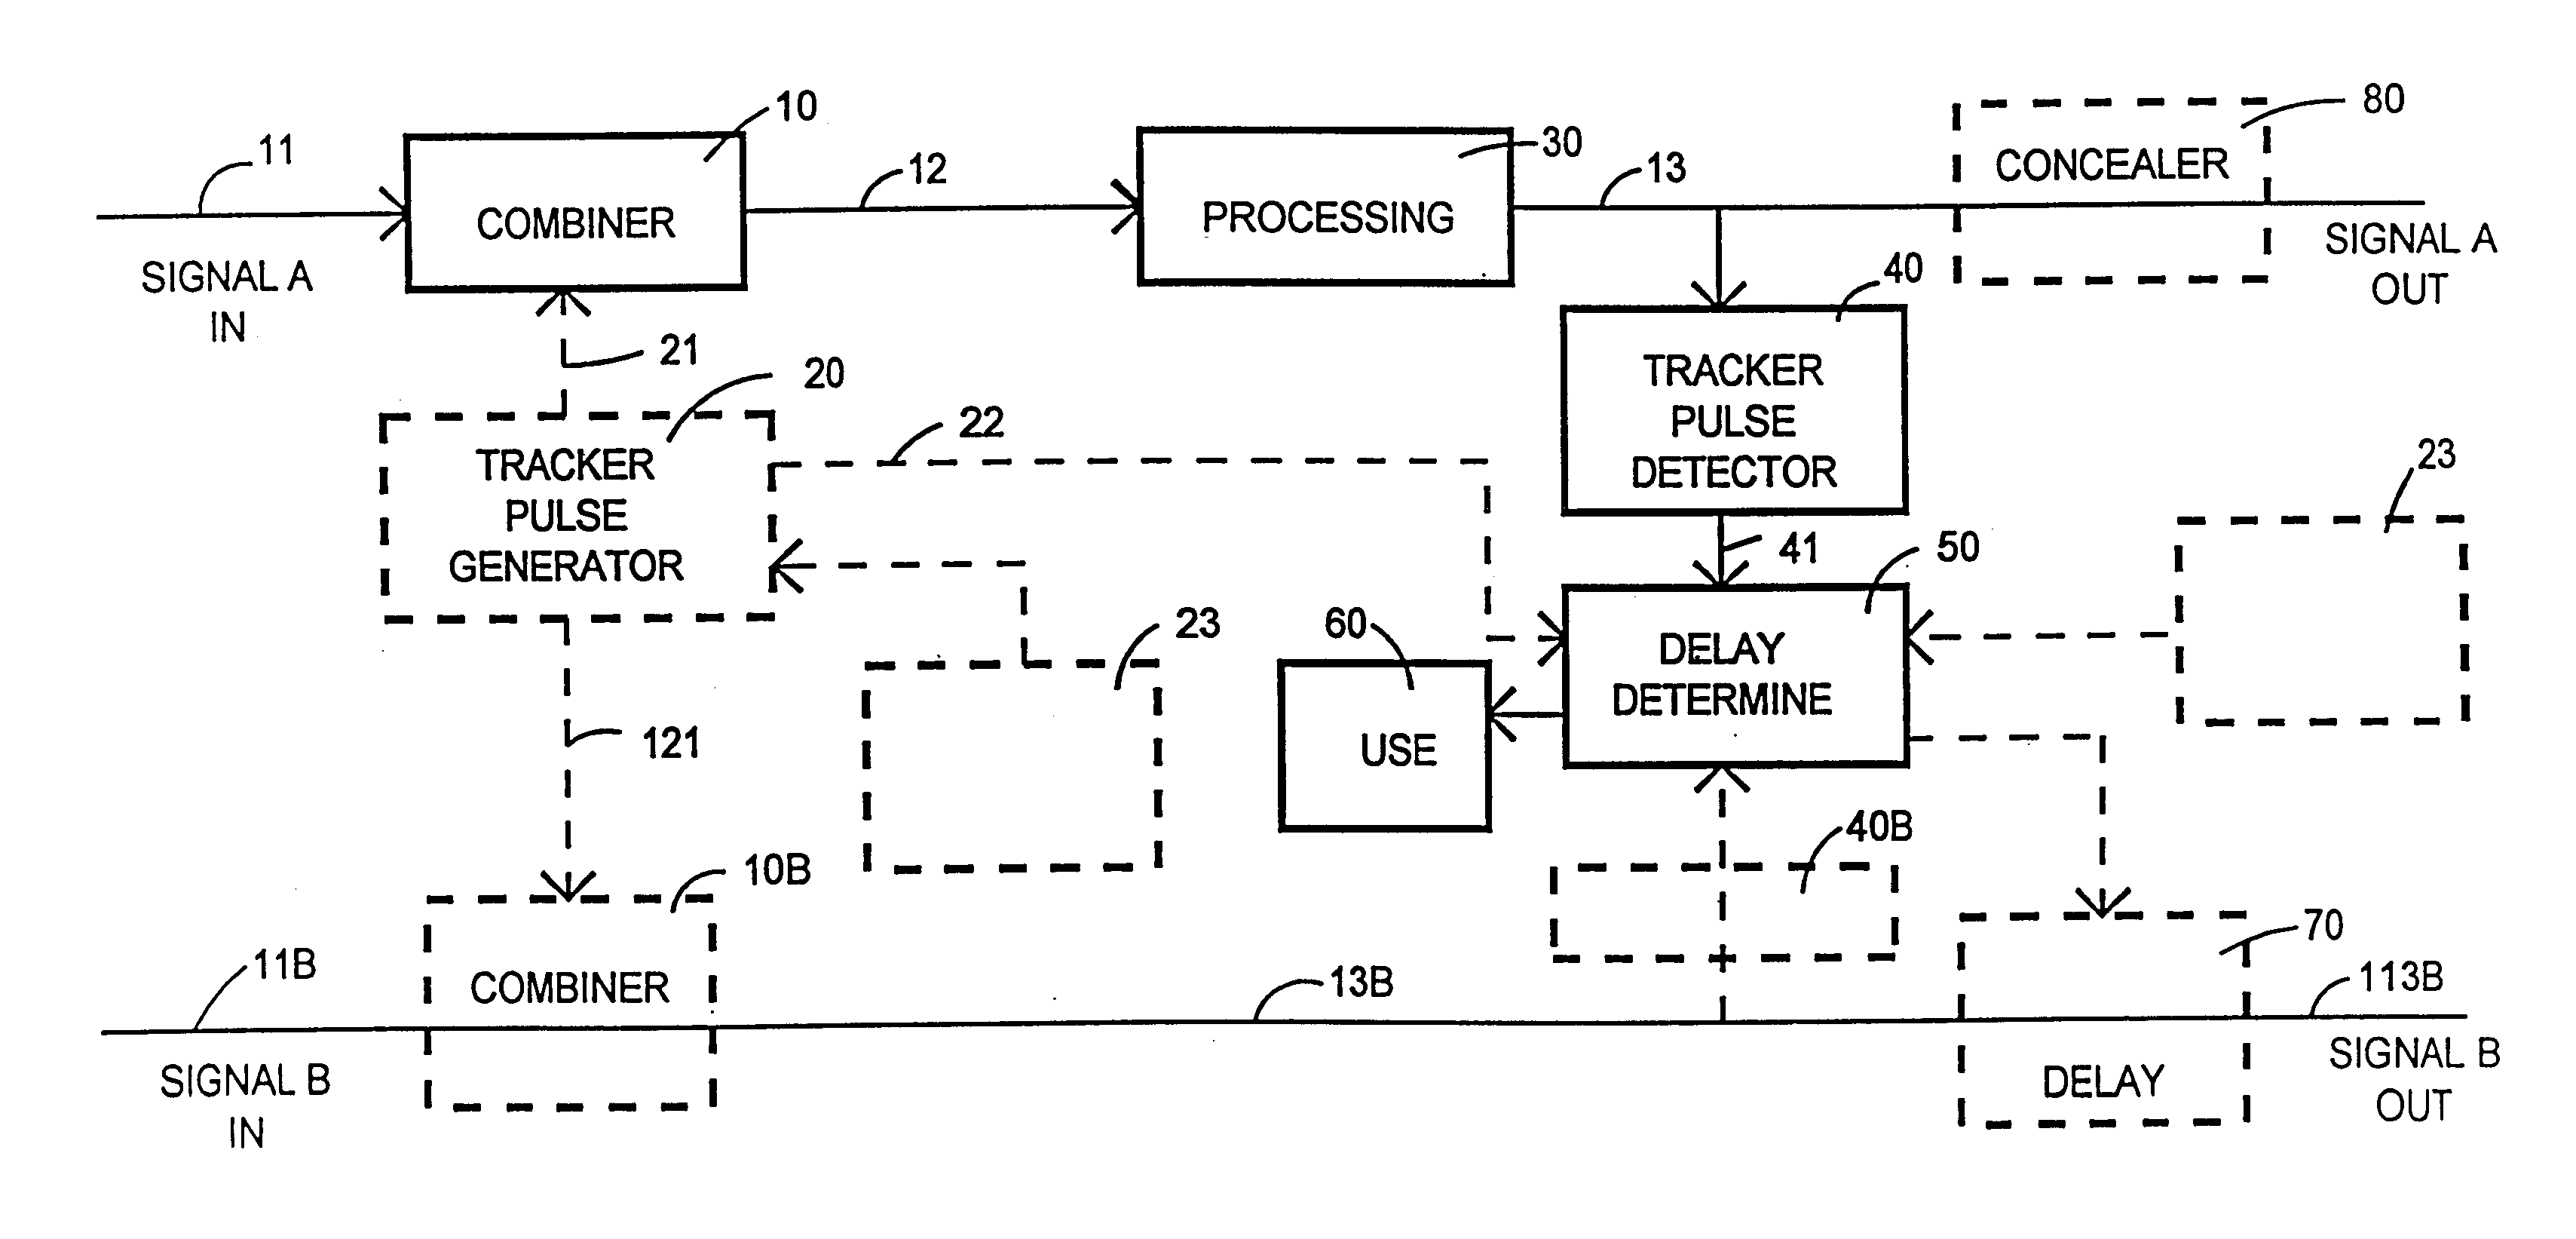 Pulse detector for ascertaining the processing delay of a signal